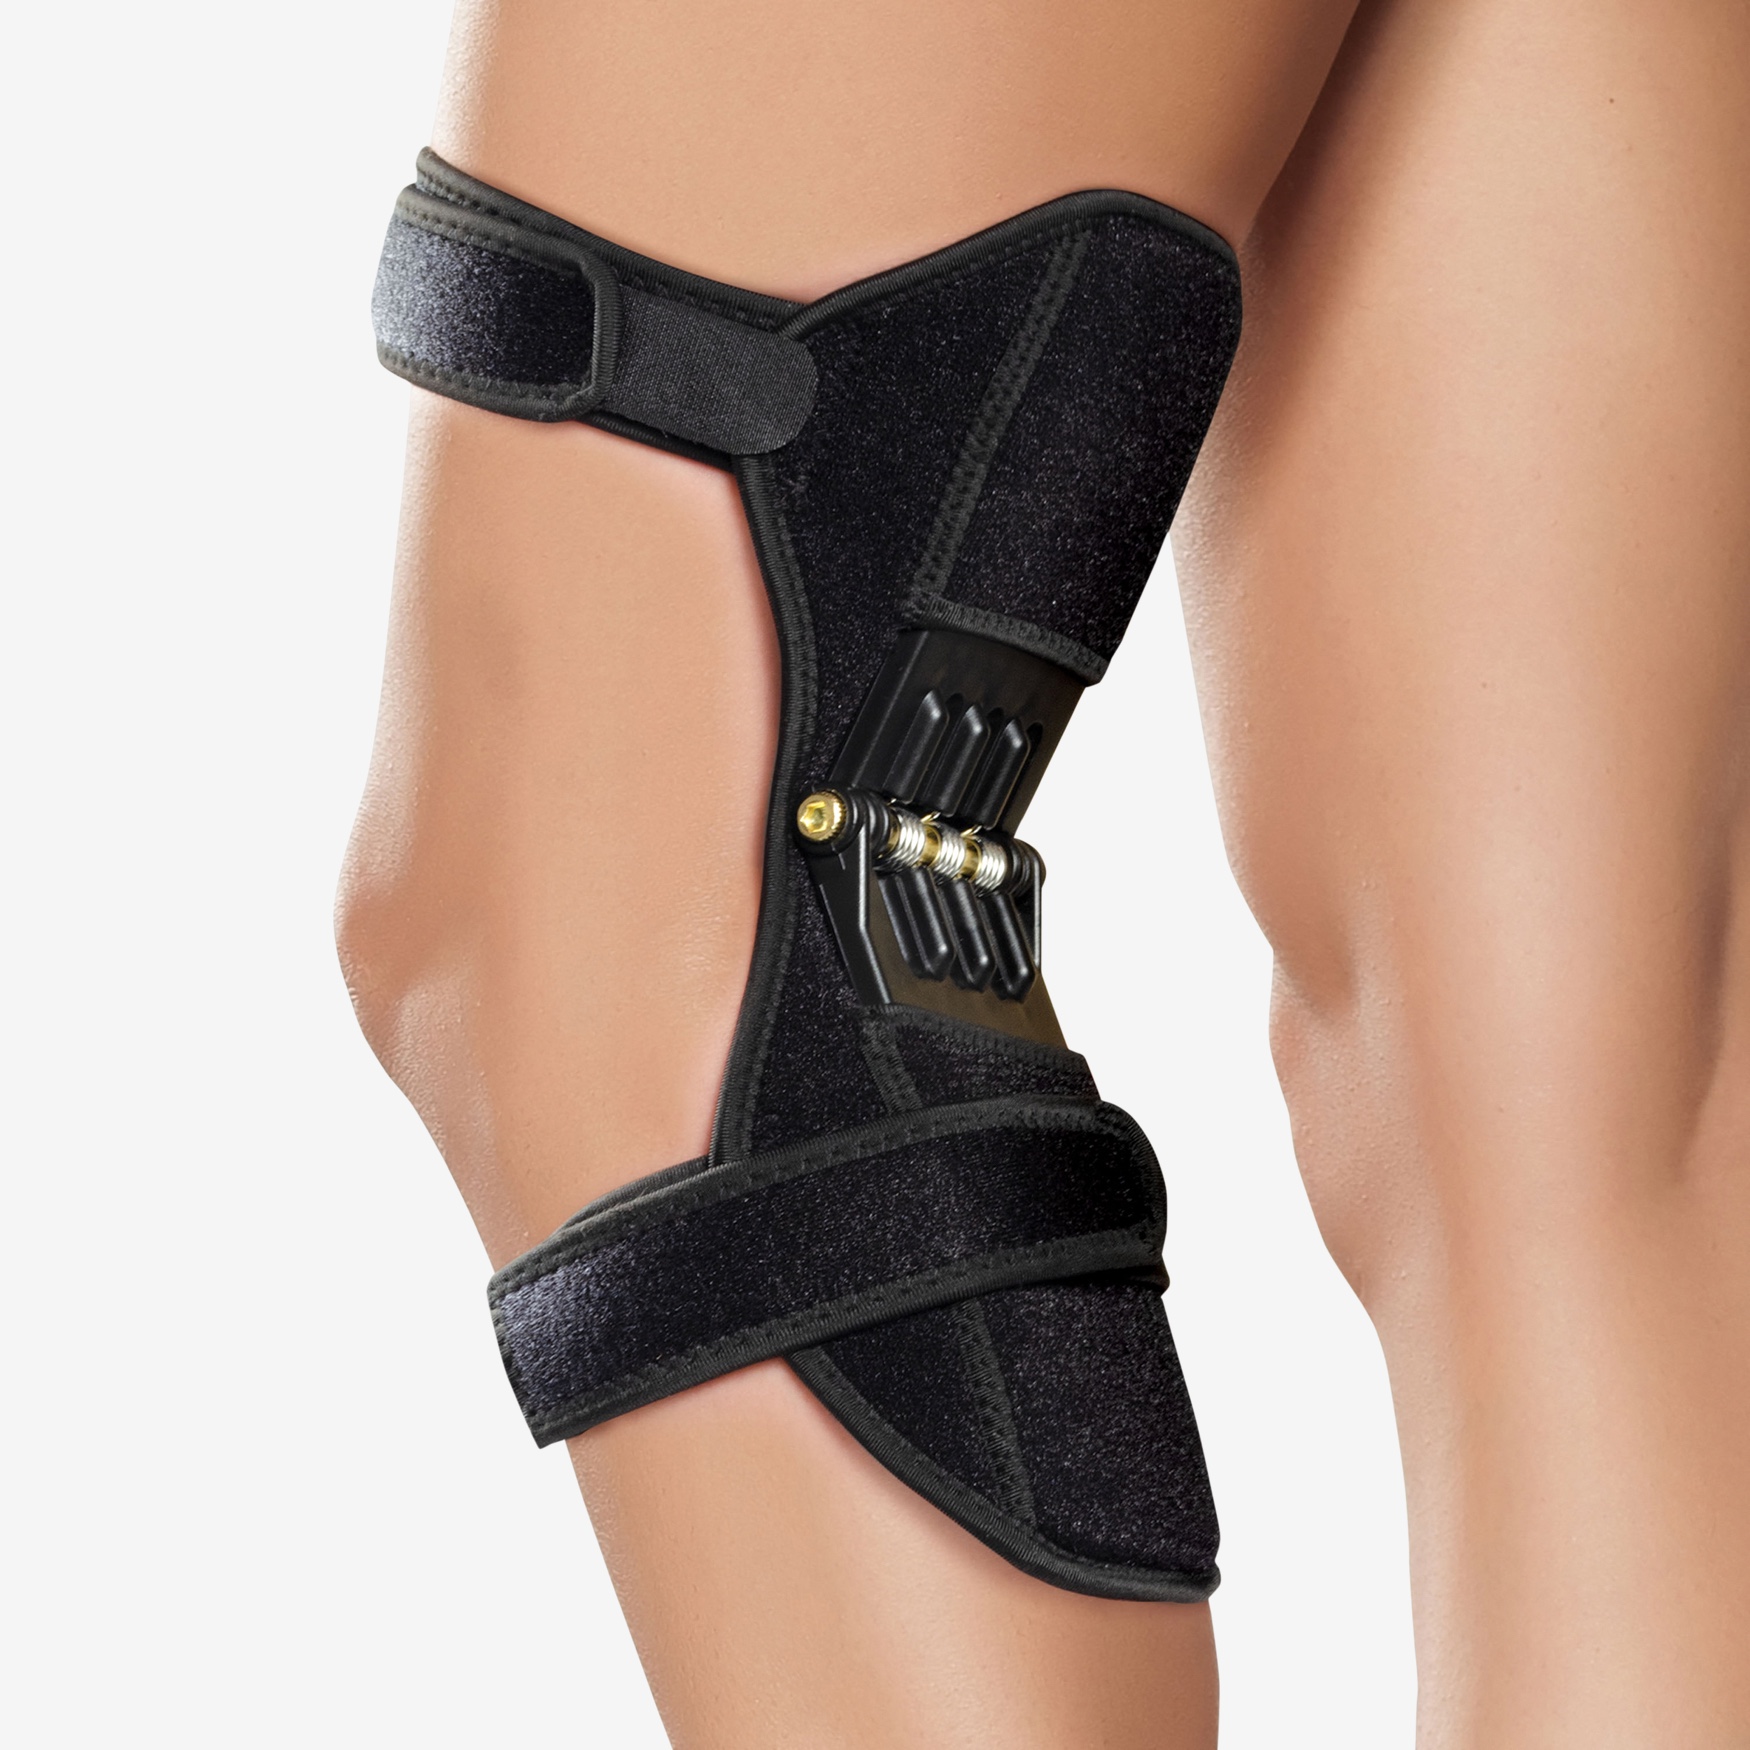 Spring Powered Knee Support, BLACK